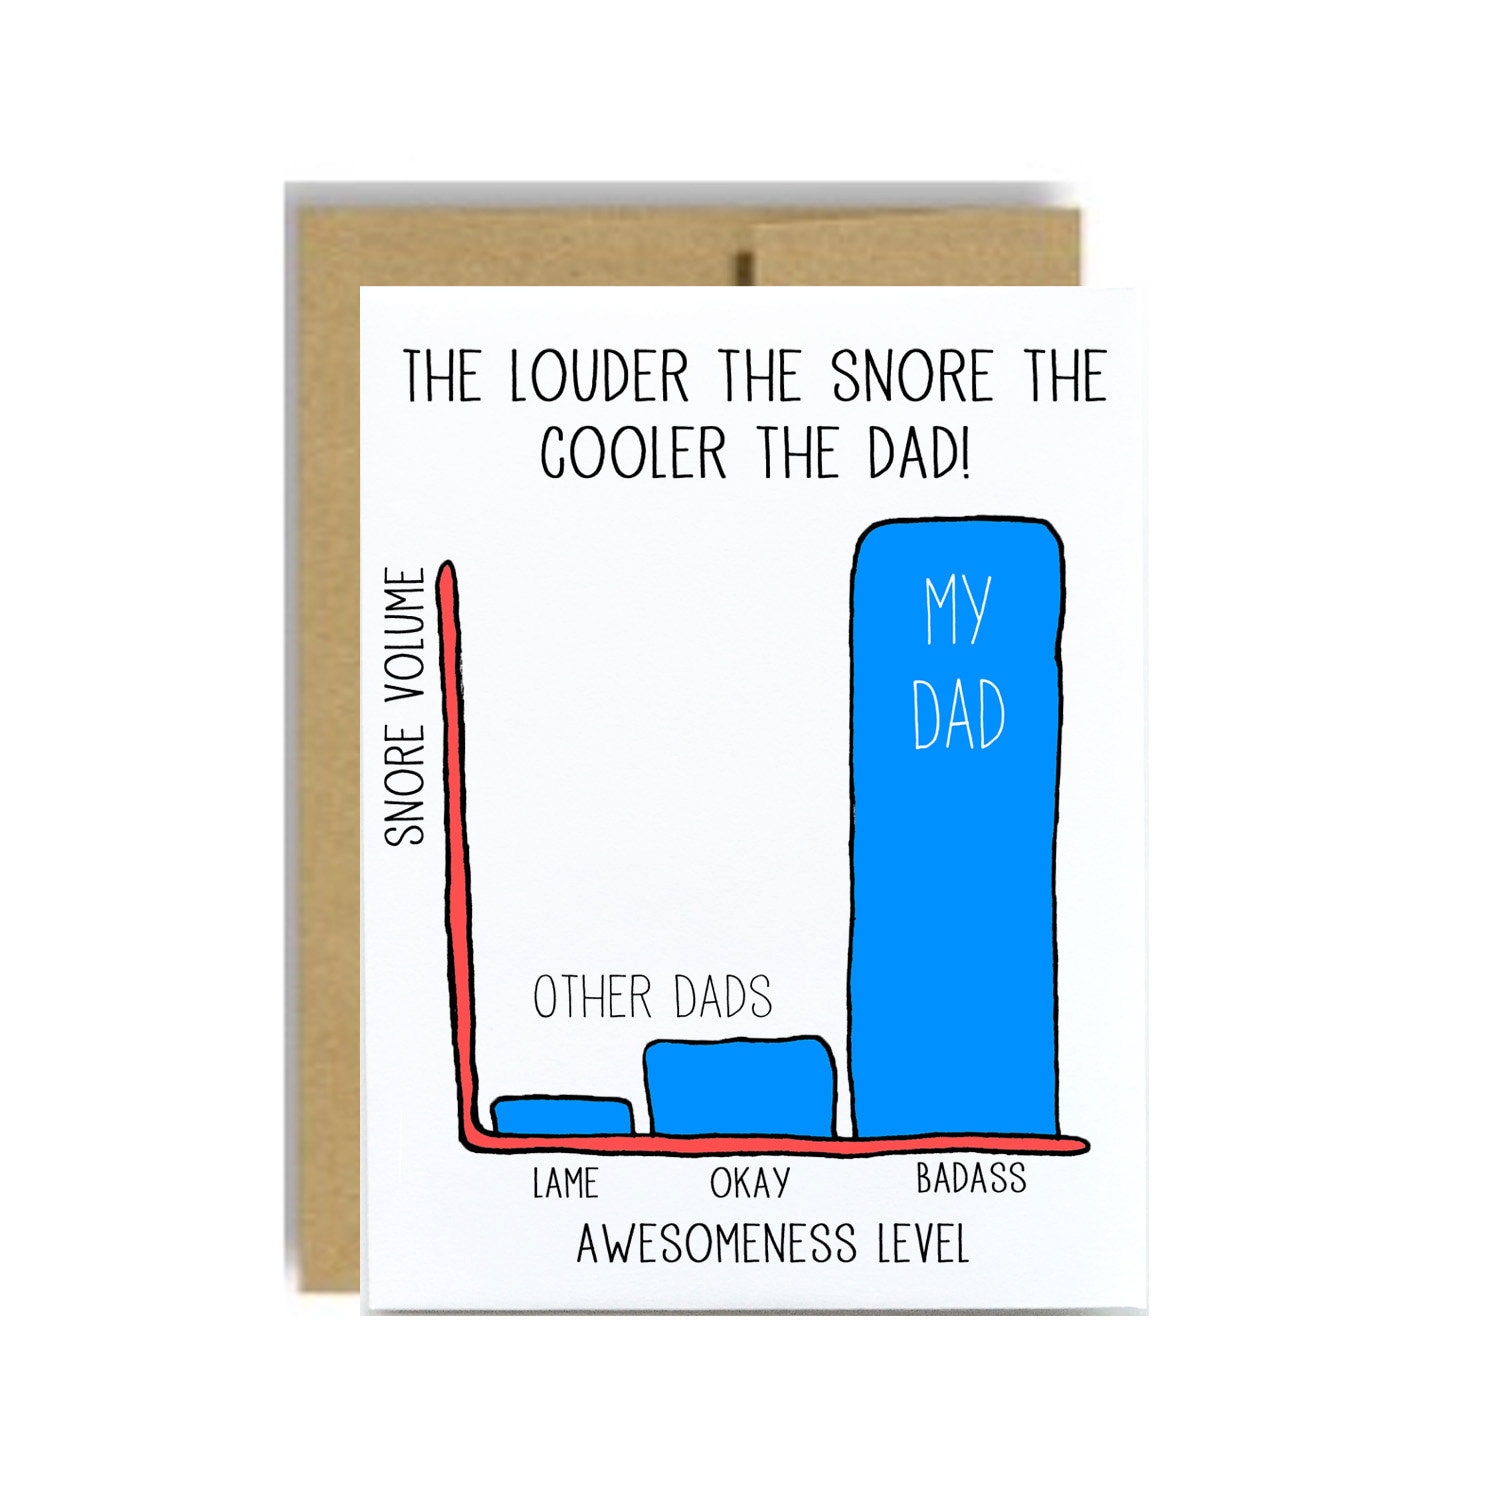 Funny fathers day greeting card dad birthday snores too loud